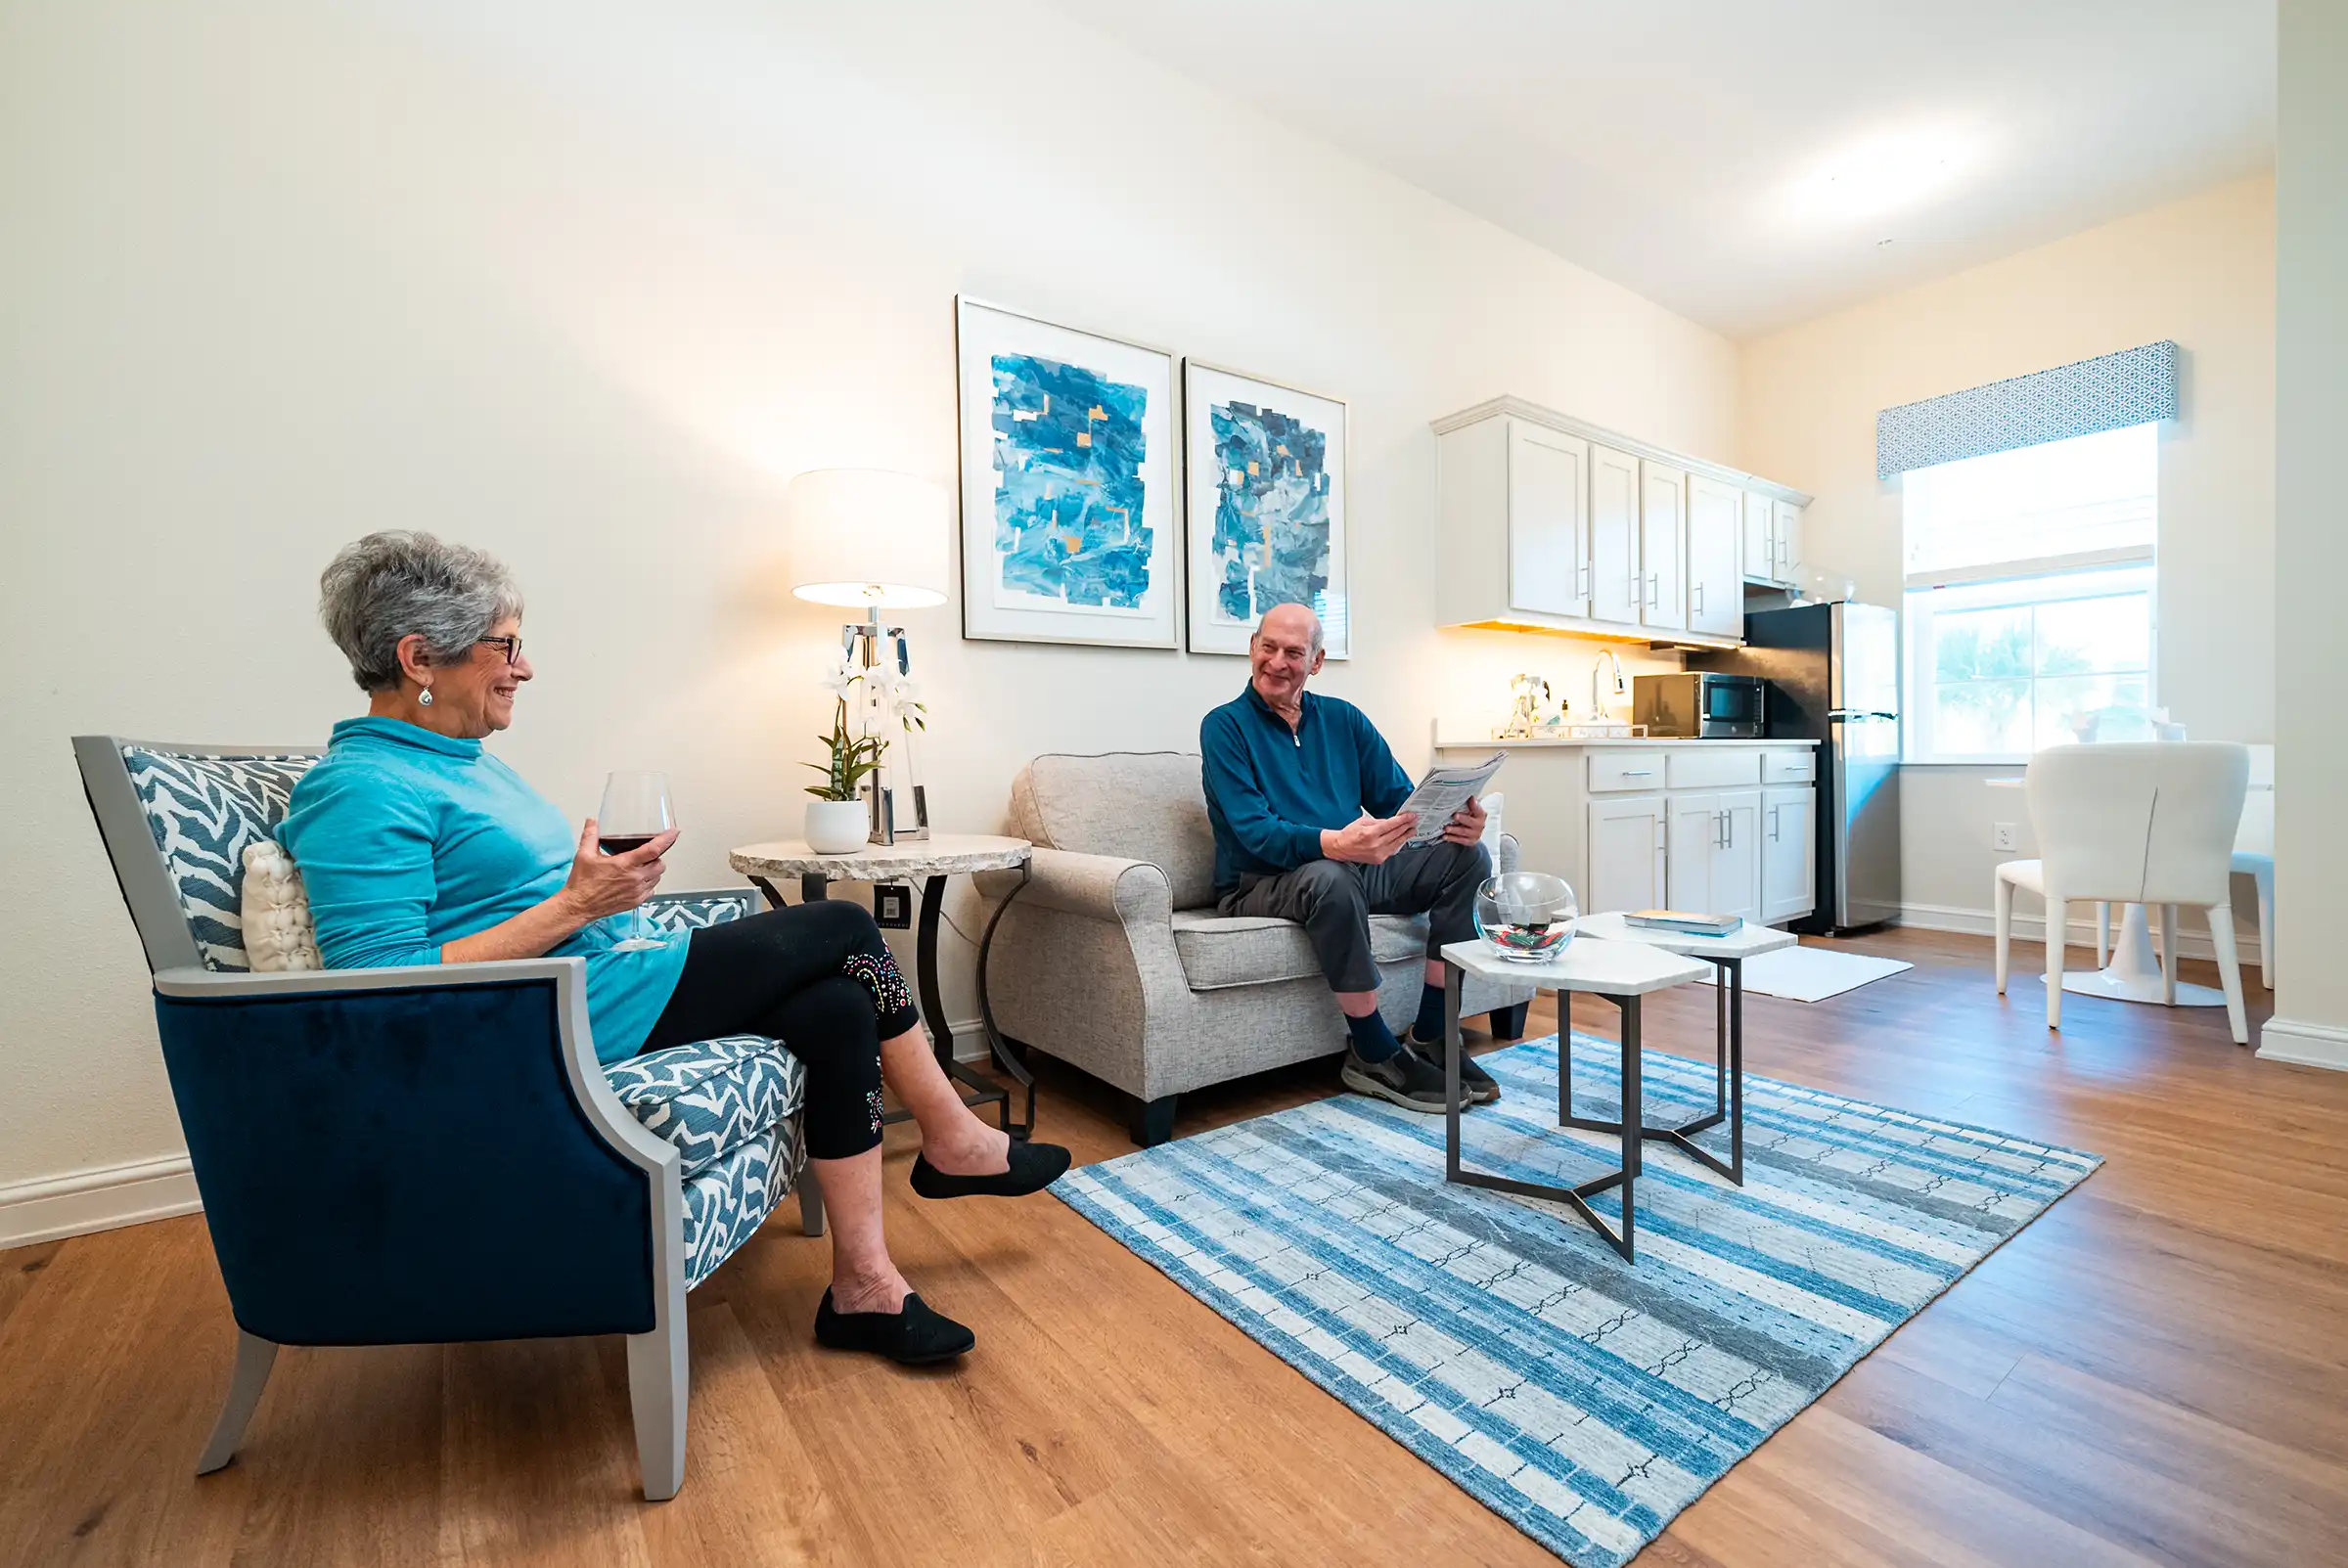 A senior couple sit together in a modern-style appointed living area